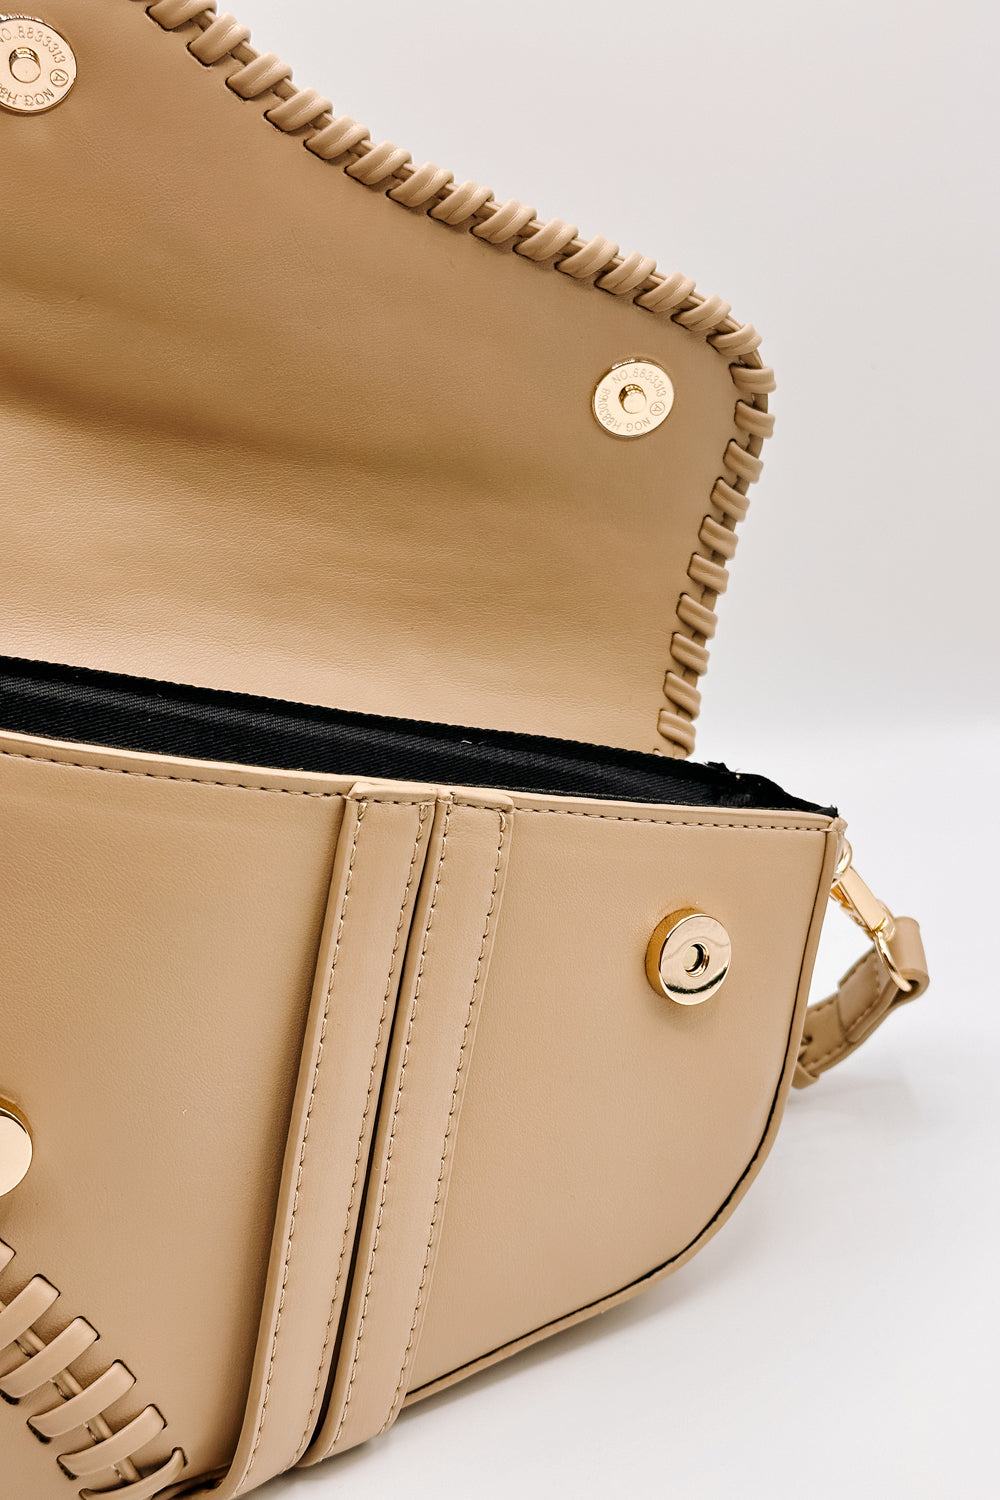 close up view of the Sloane Sand Leather Braided Strap Purse which features tan leather fabric, braided details, gold clasp closure, braided strap, tan lining and curvy hem shape